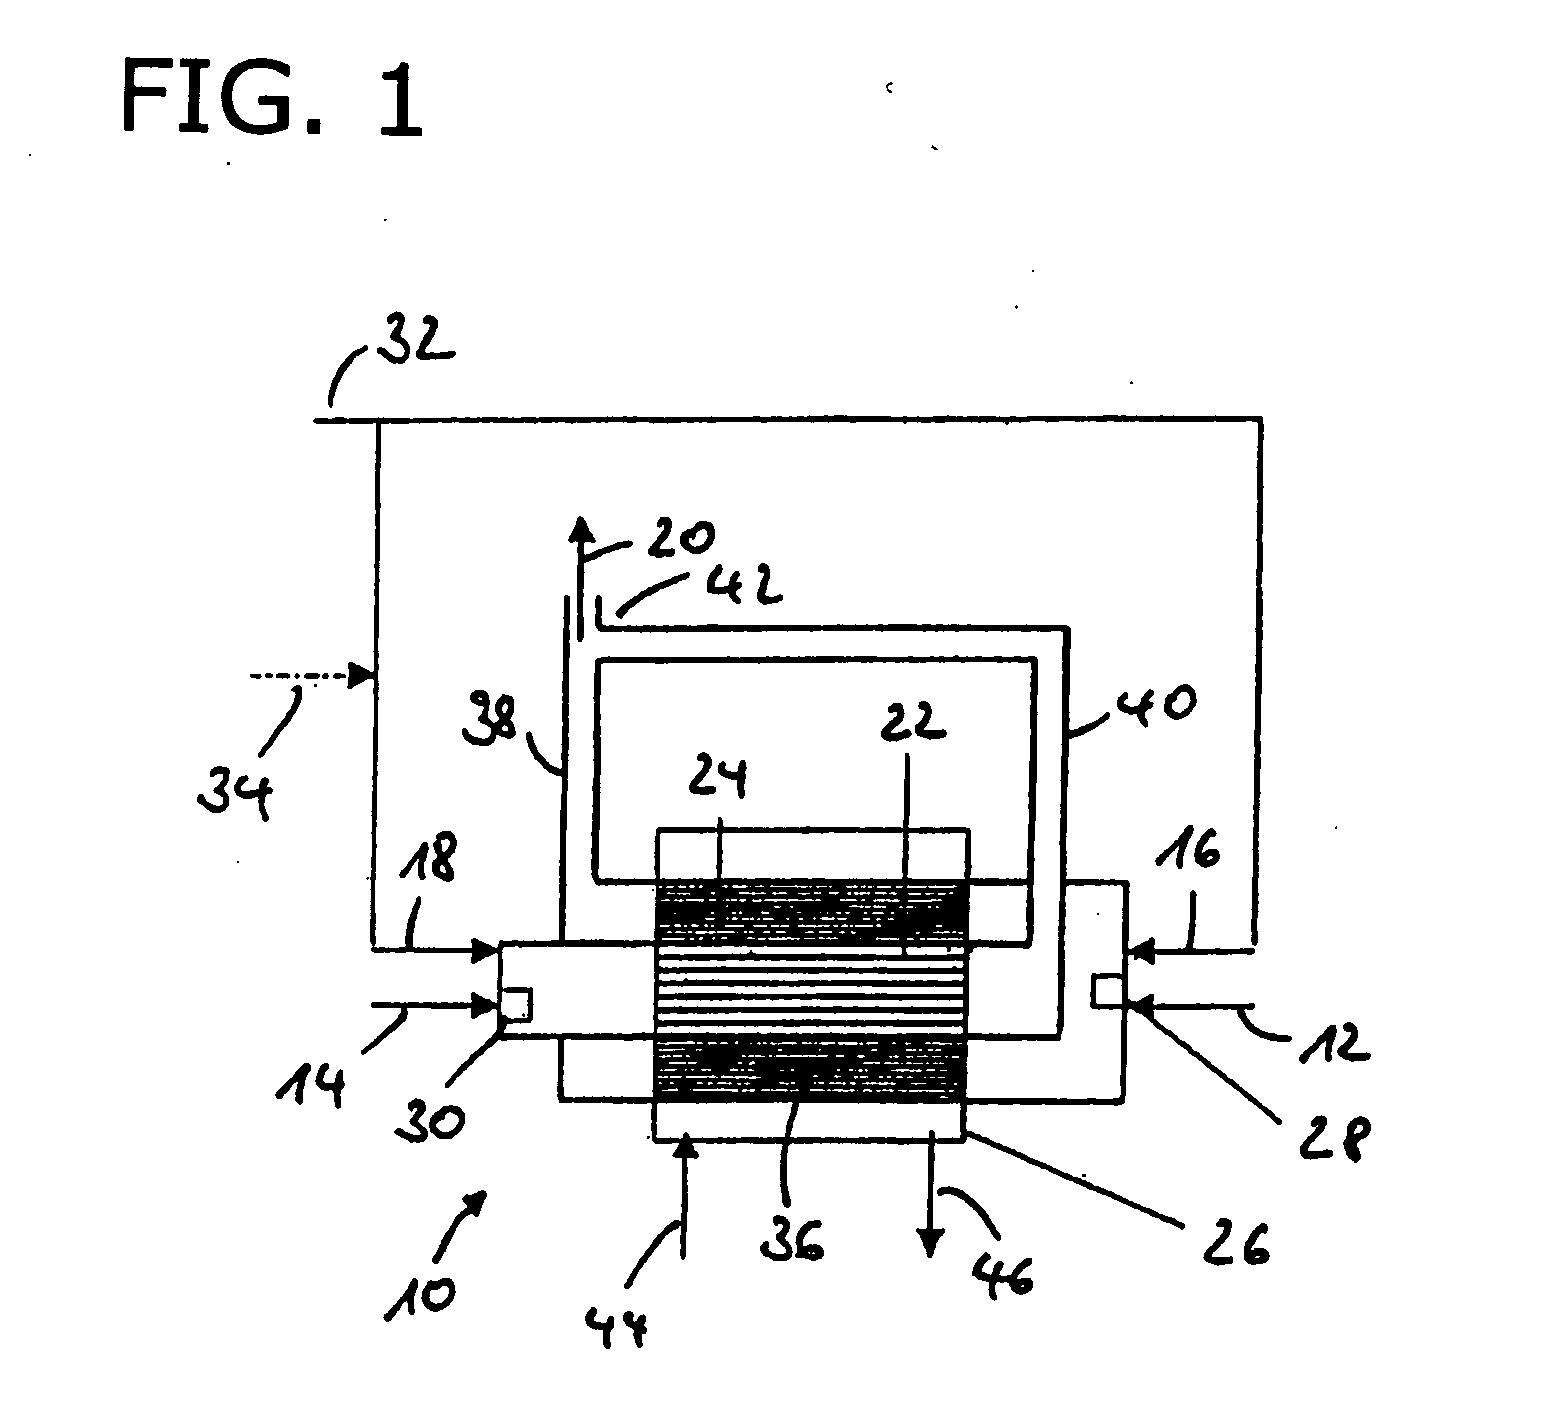 Reformer and process for reacting fuel and oxidizer into reformate